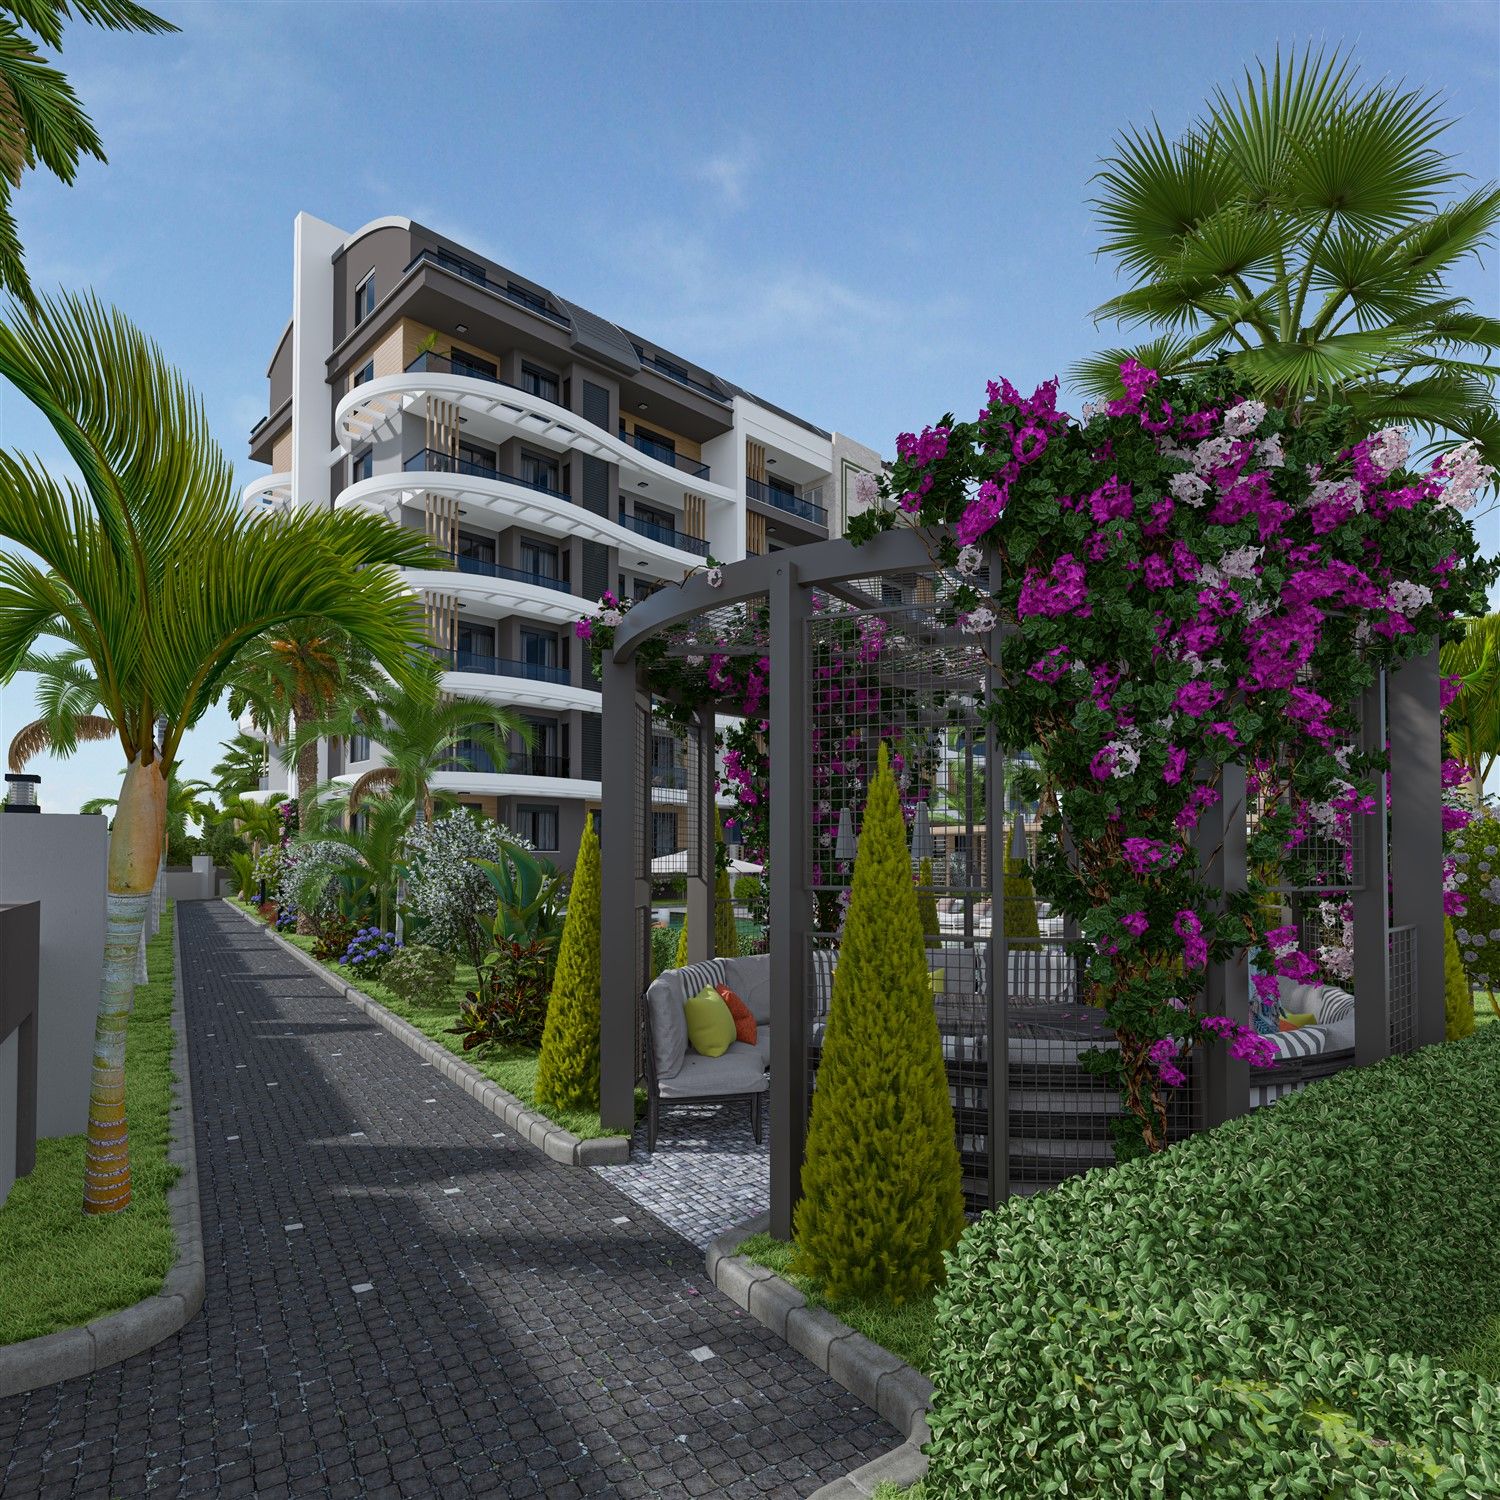 Project of residential complex within walking distance from the sea, Gazipasa